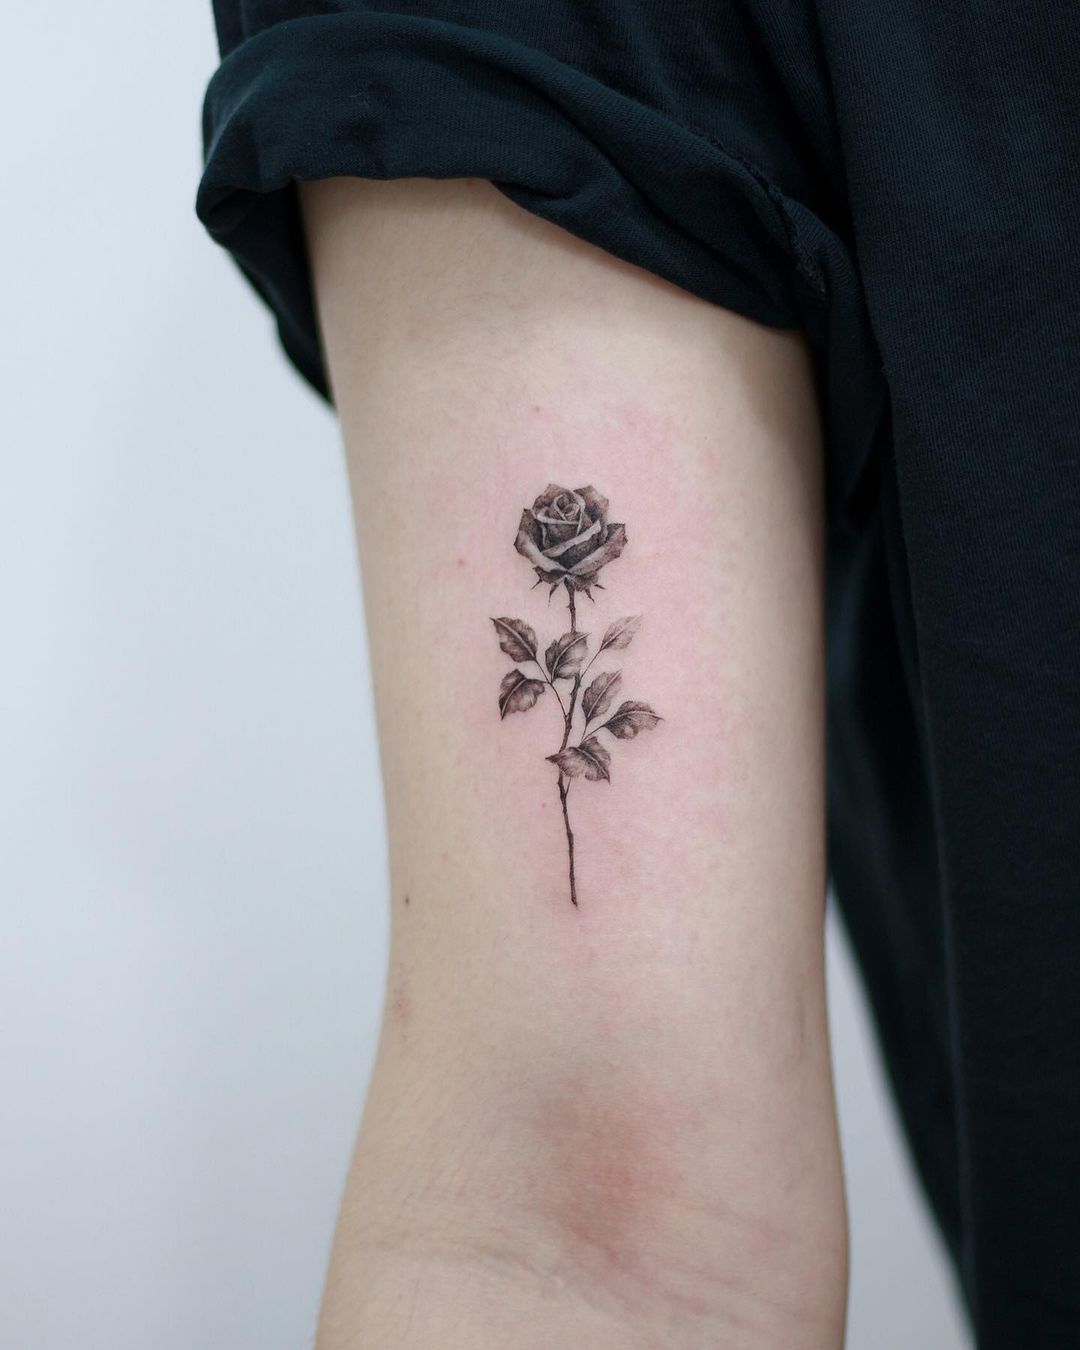 Malin Semi-Permanent Tattoo. Lasts 1-2 weeks. Painless and easy to apply.  Organic ink. Browse more or create your own. | Inkbox™ | Semi-Permanent  Tattoos